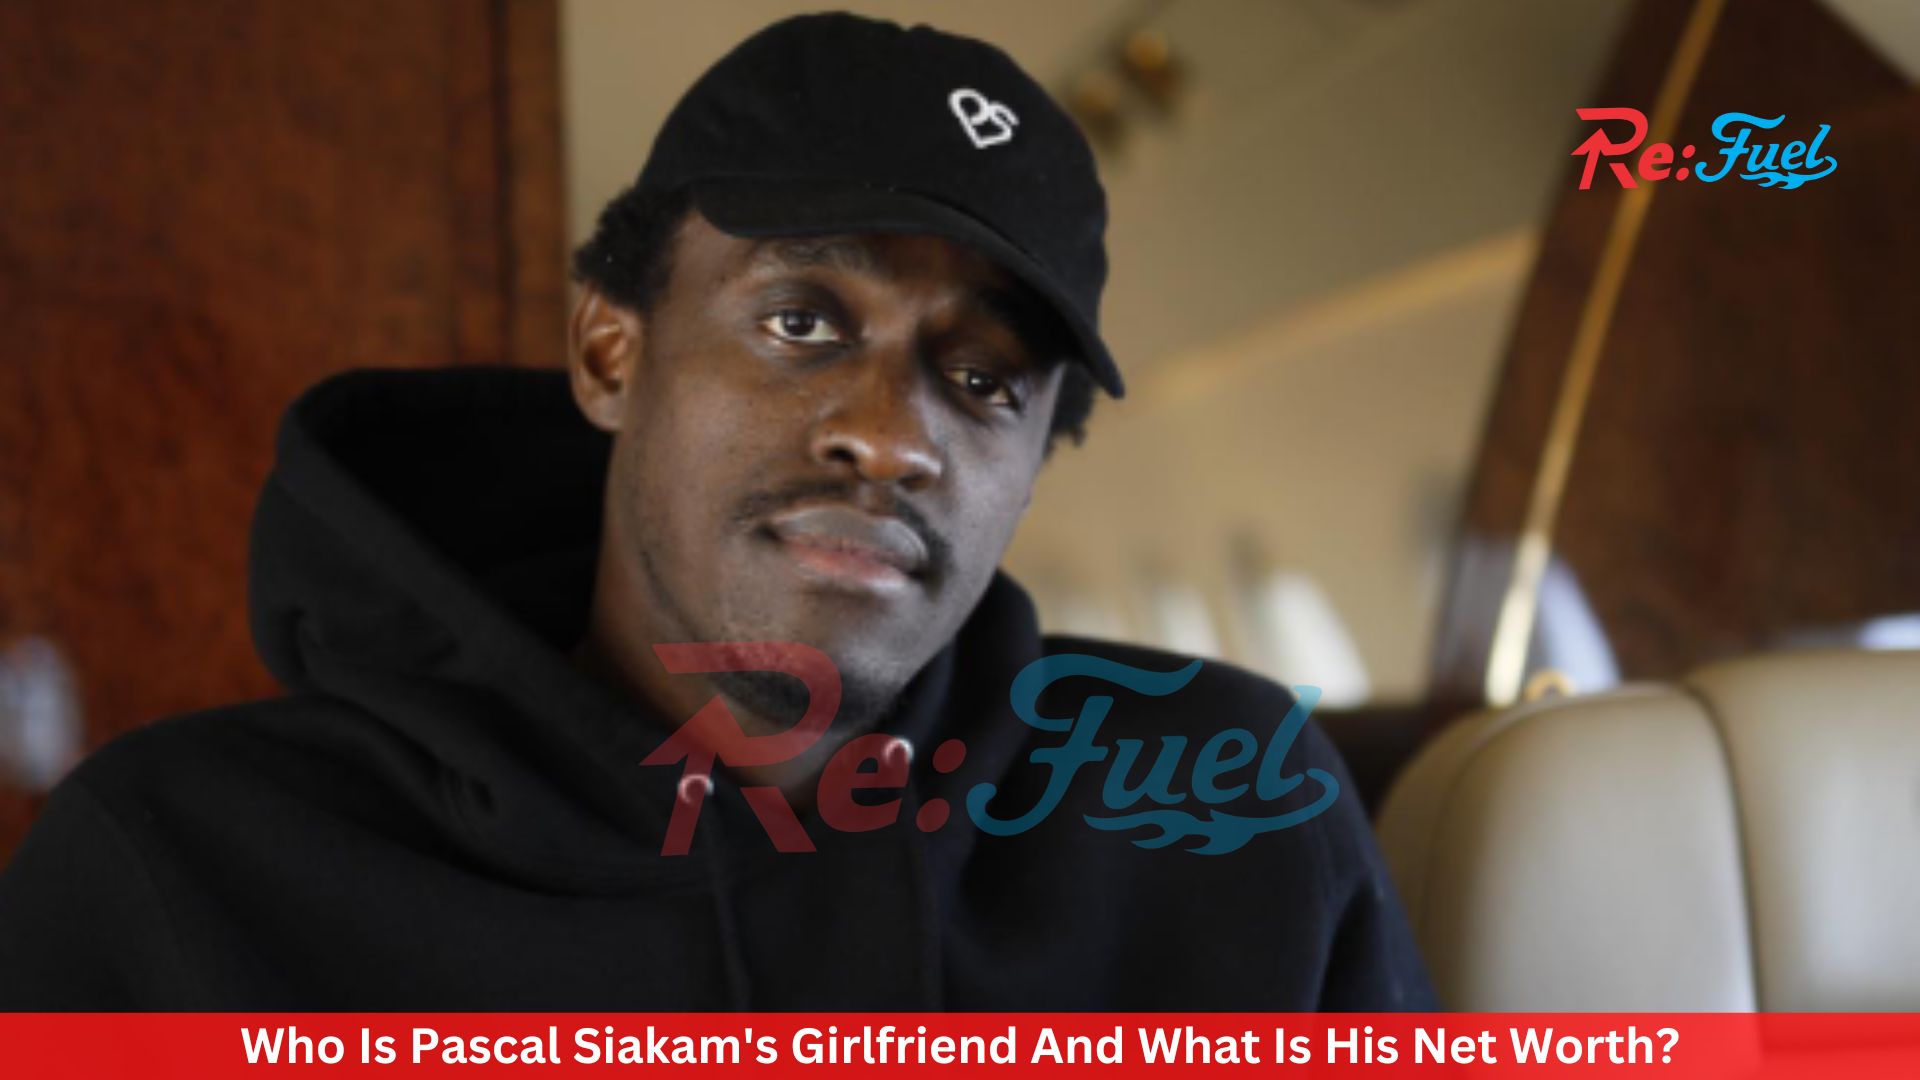 Who Is Pascal Siakam's Girlfriend And What Is His Net Worth?